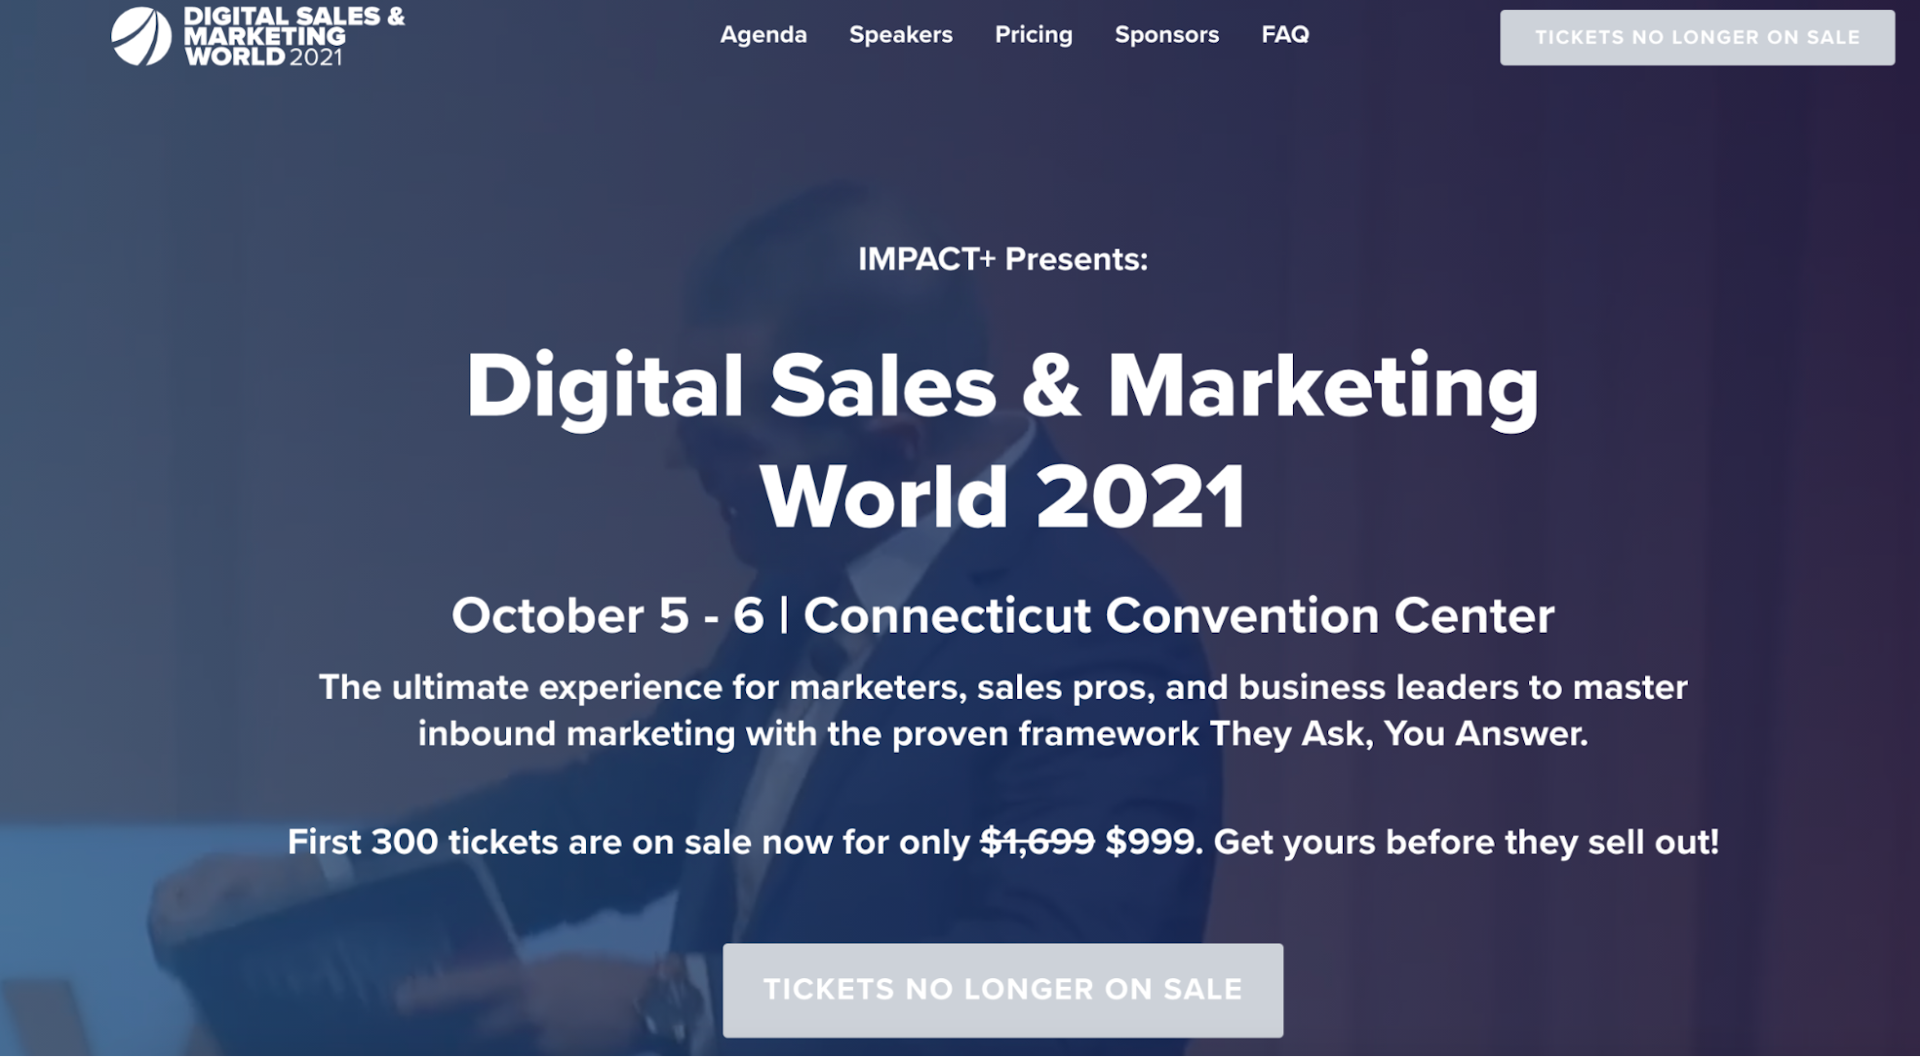 Event page for Digital Sales & Marketing World 2021